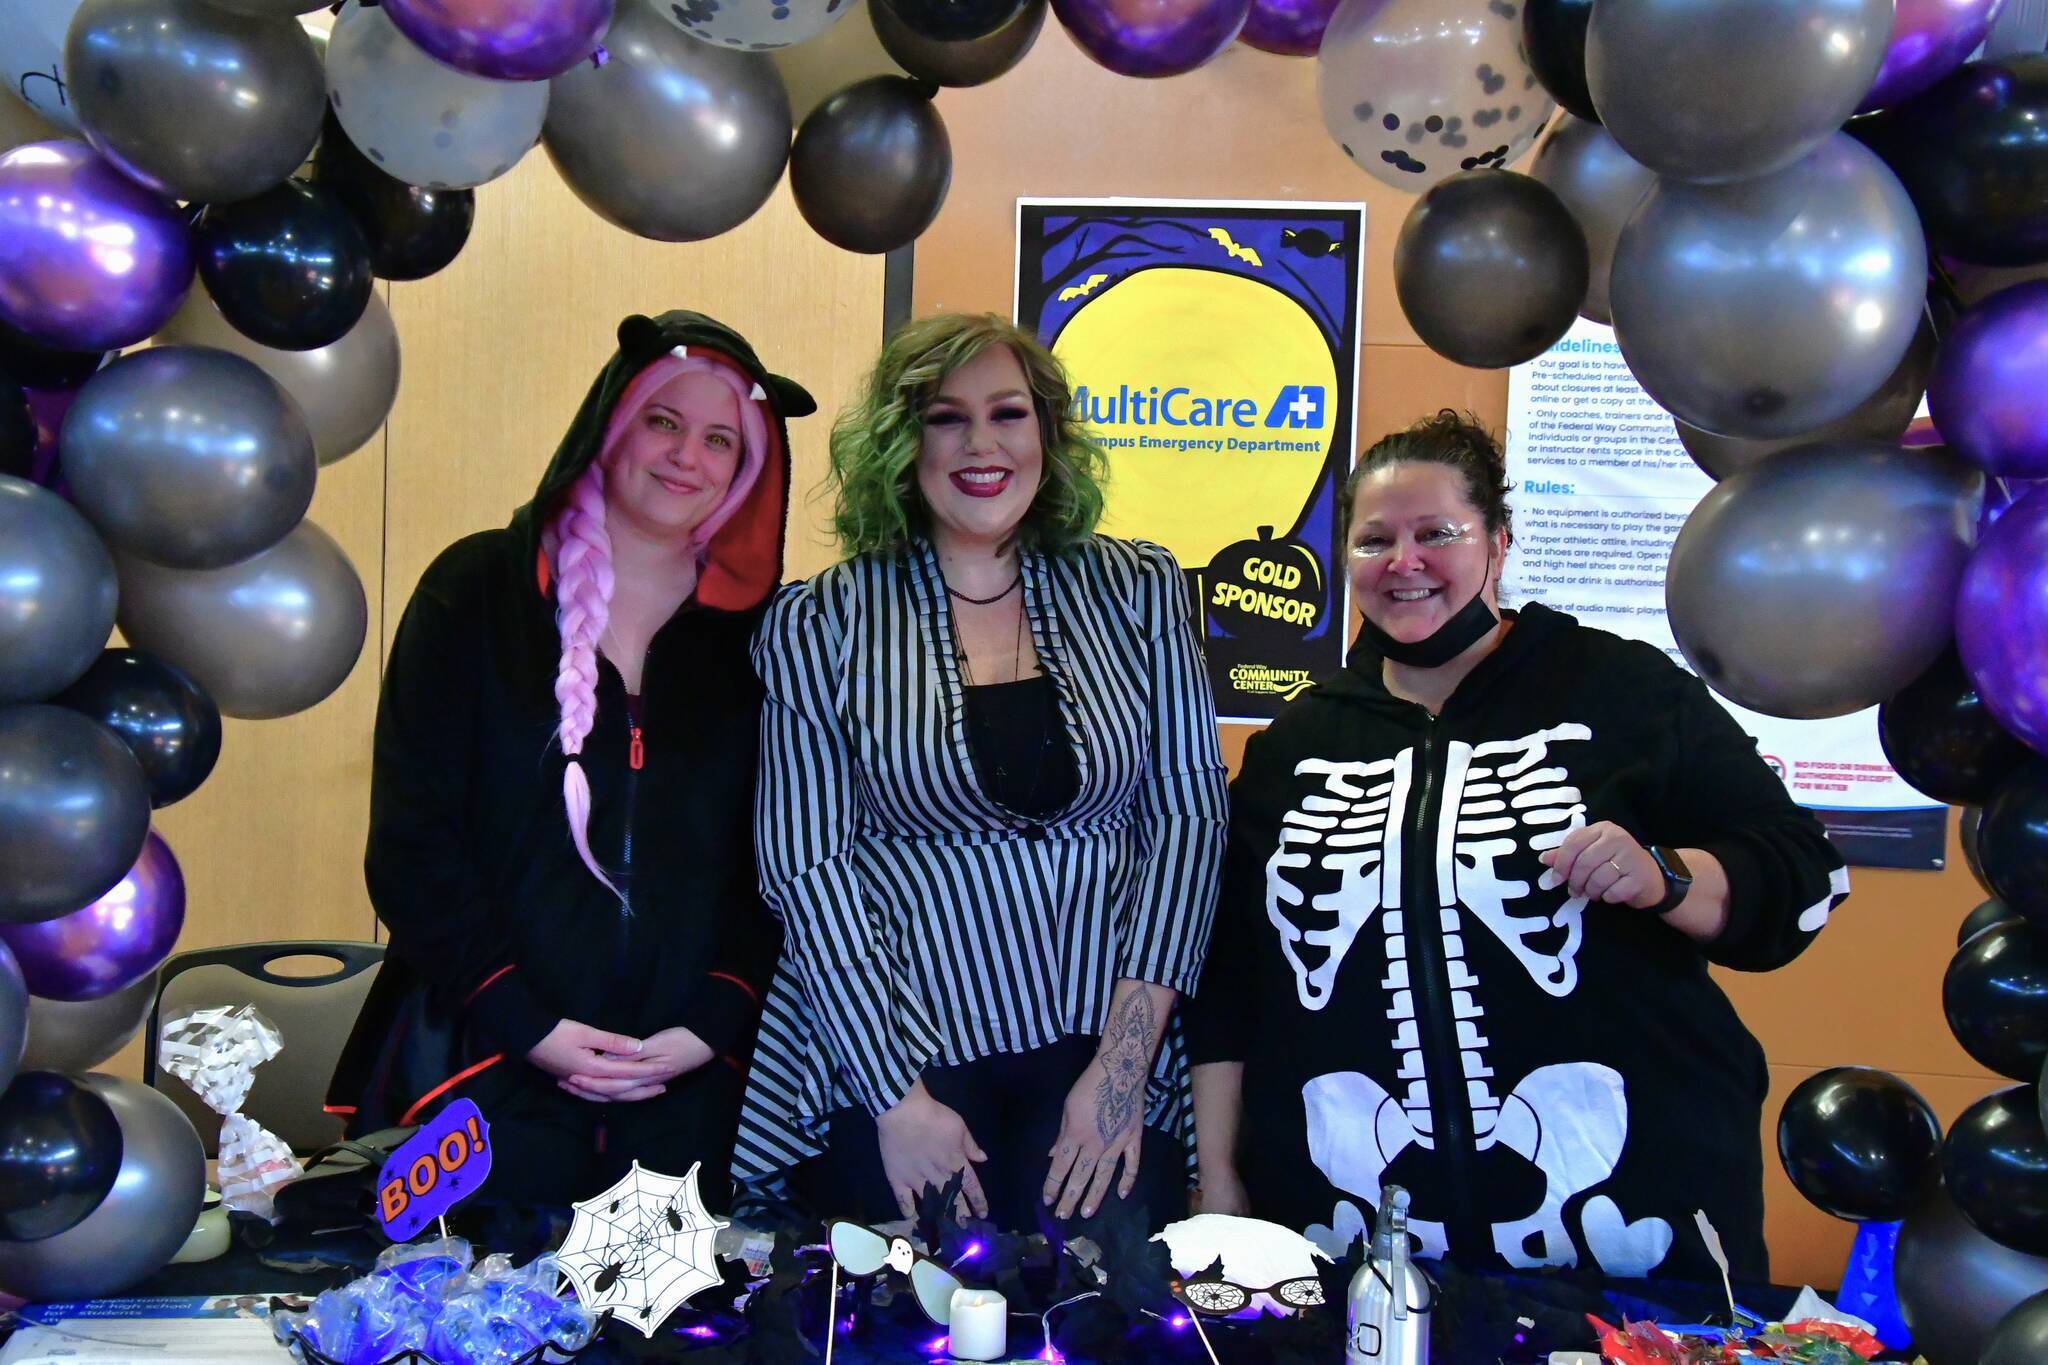 Photo by Bruce Honda
The Federal Way Community Center’s Halloween event featured several community booths and even adults got in on the costume fun.